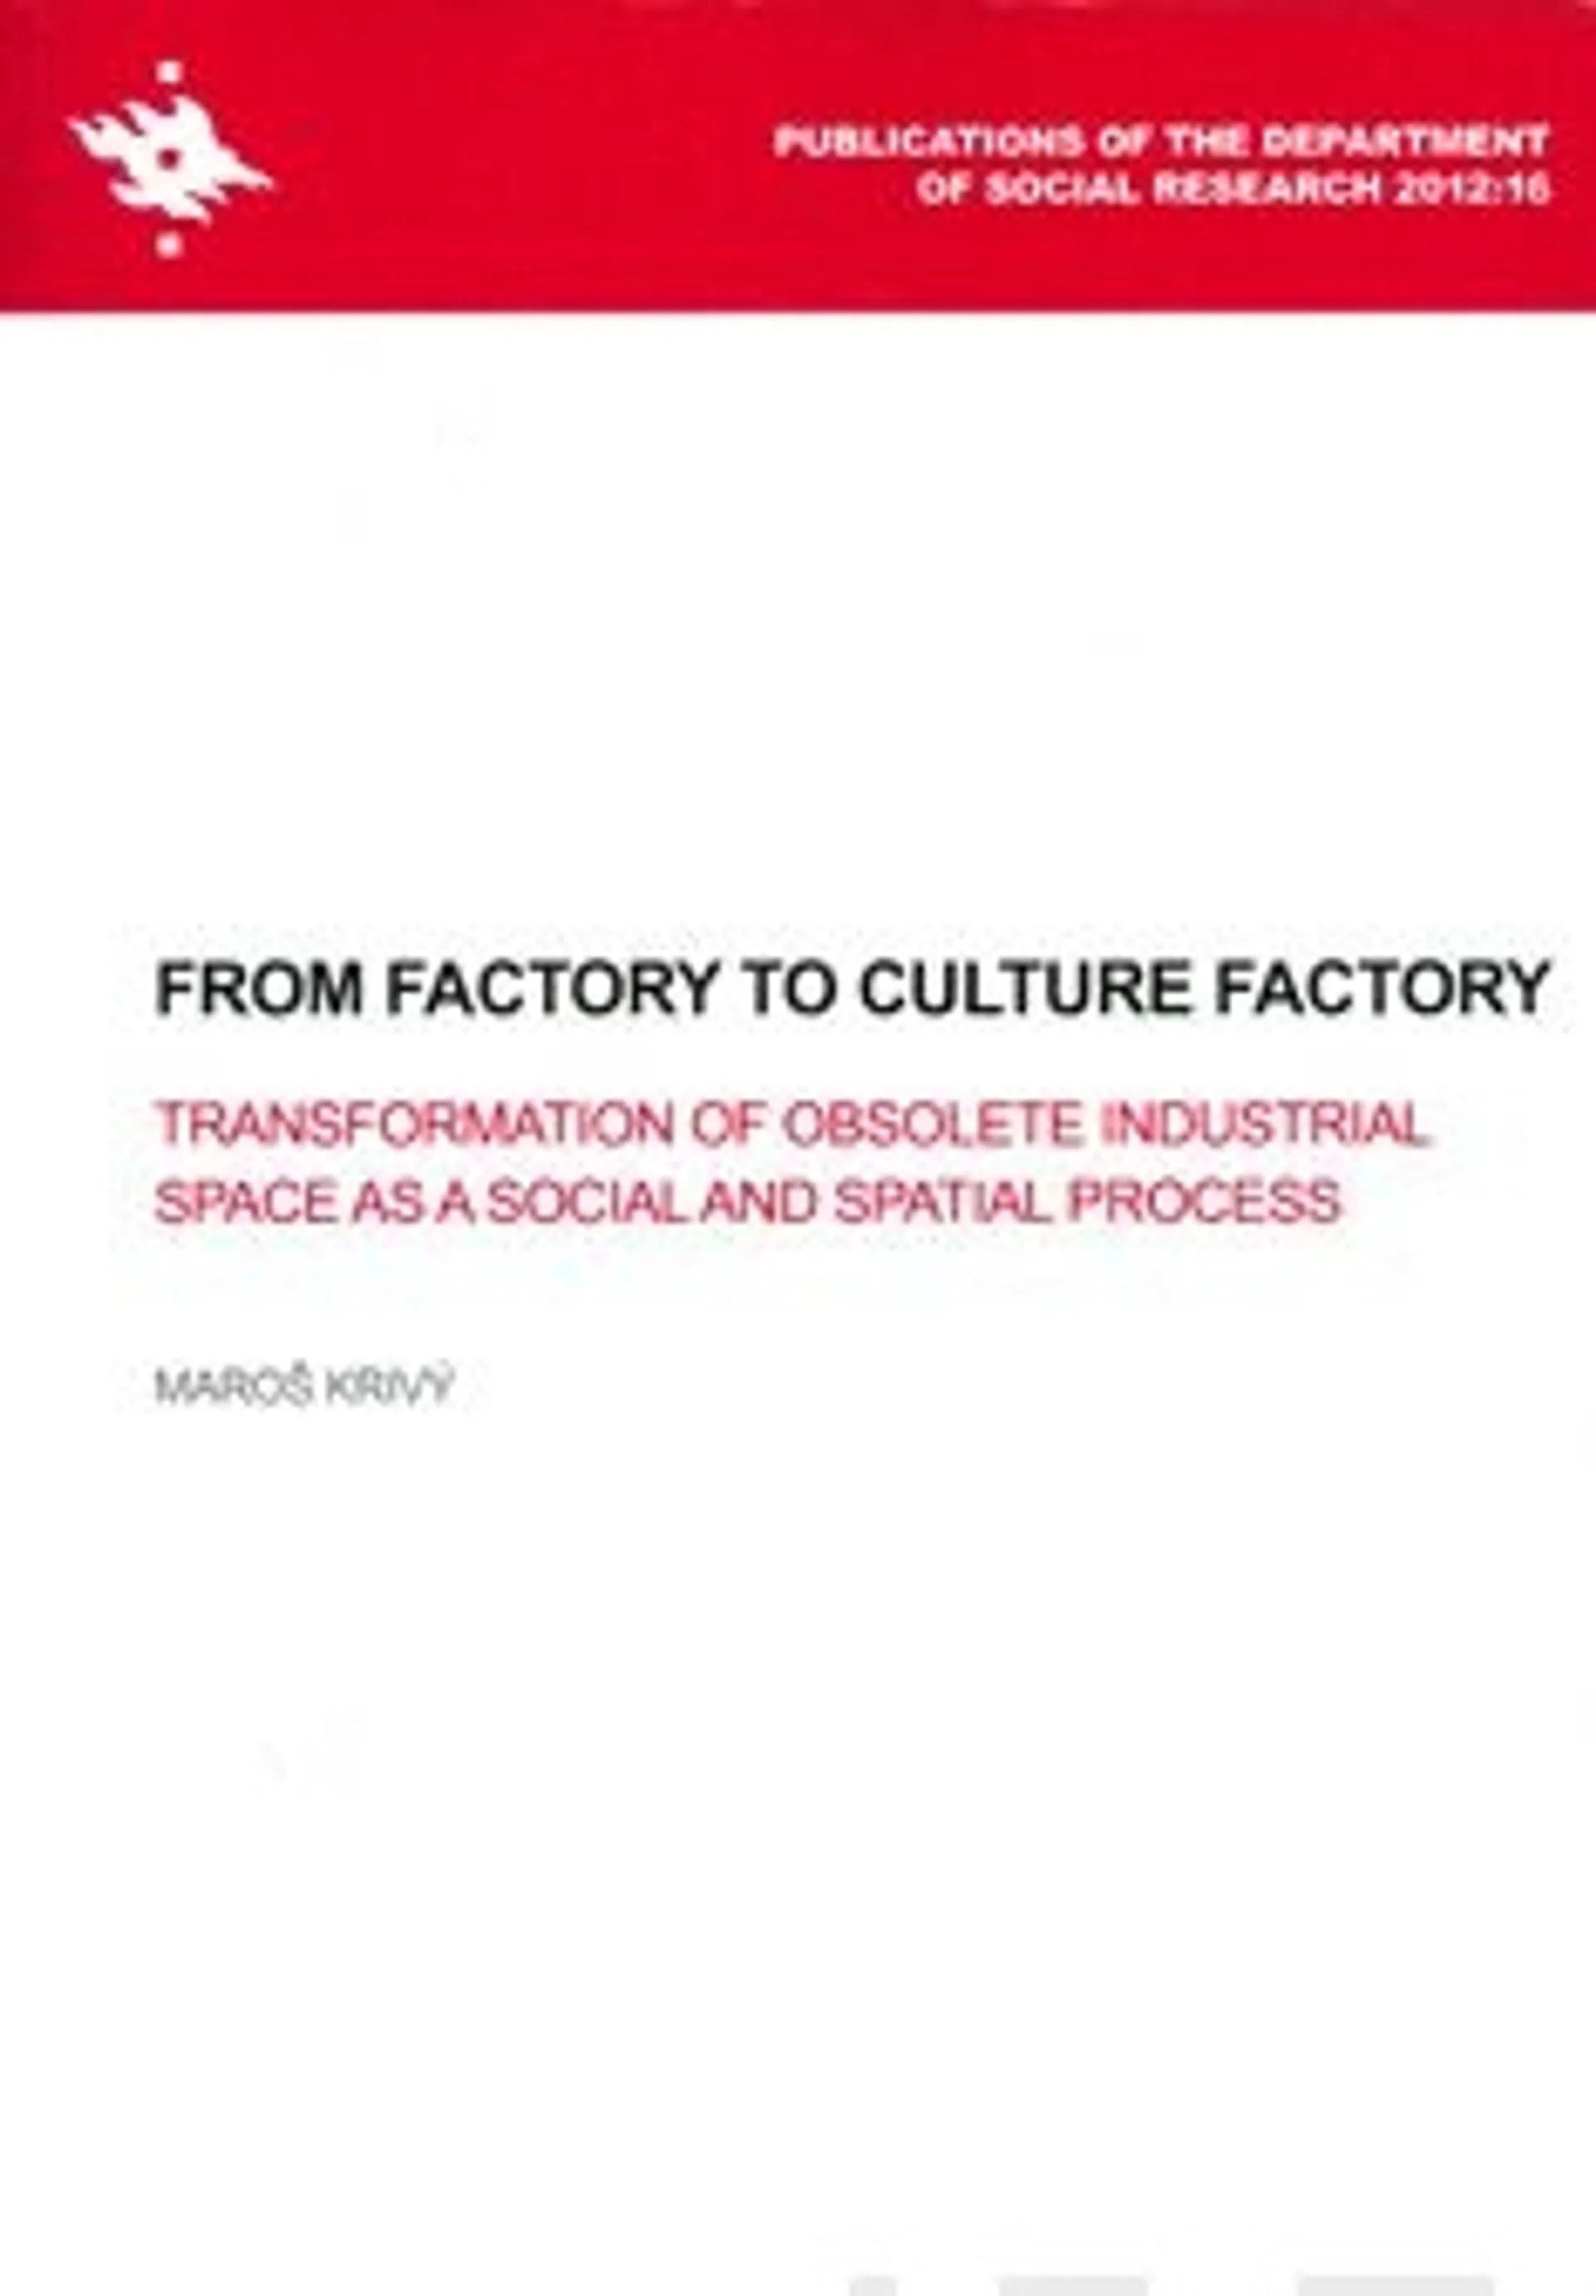 Maros, From Factory to Culture Factory